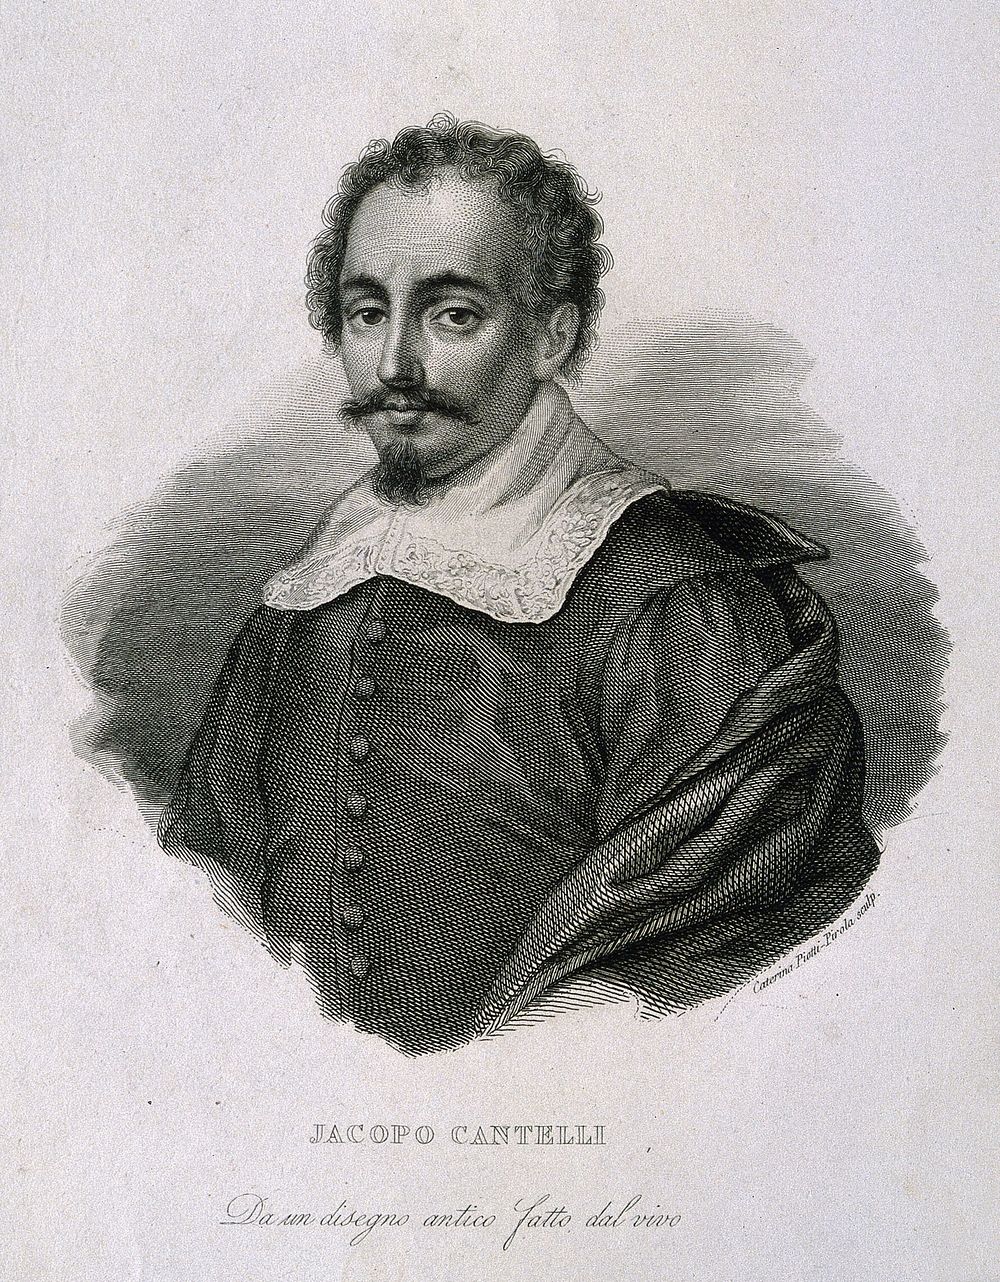 Jacopo Cantelli. Line engraving by Caterina Piotti-Pirola.